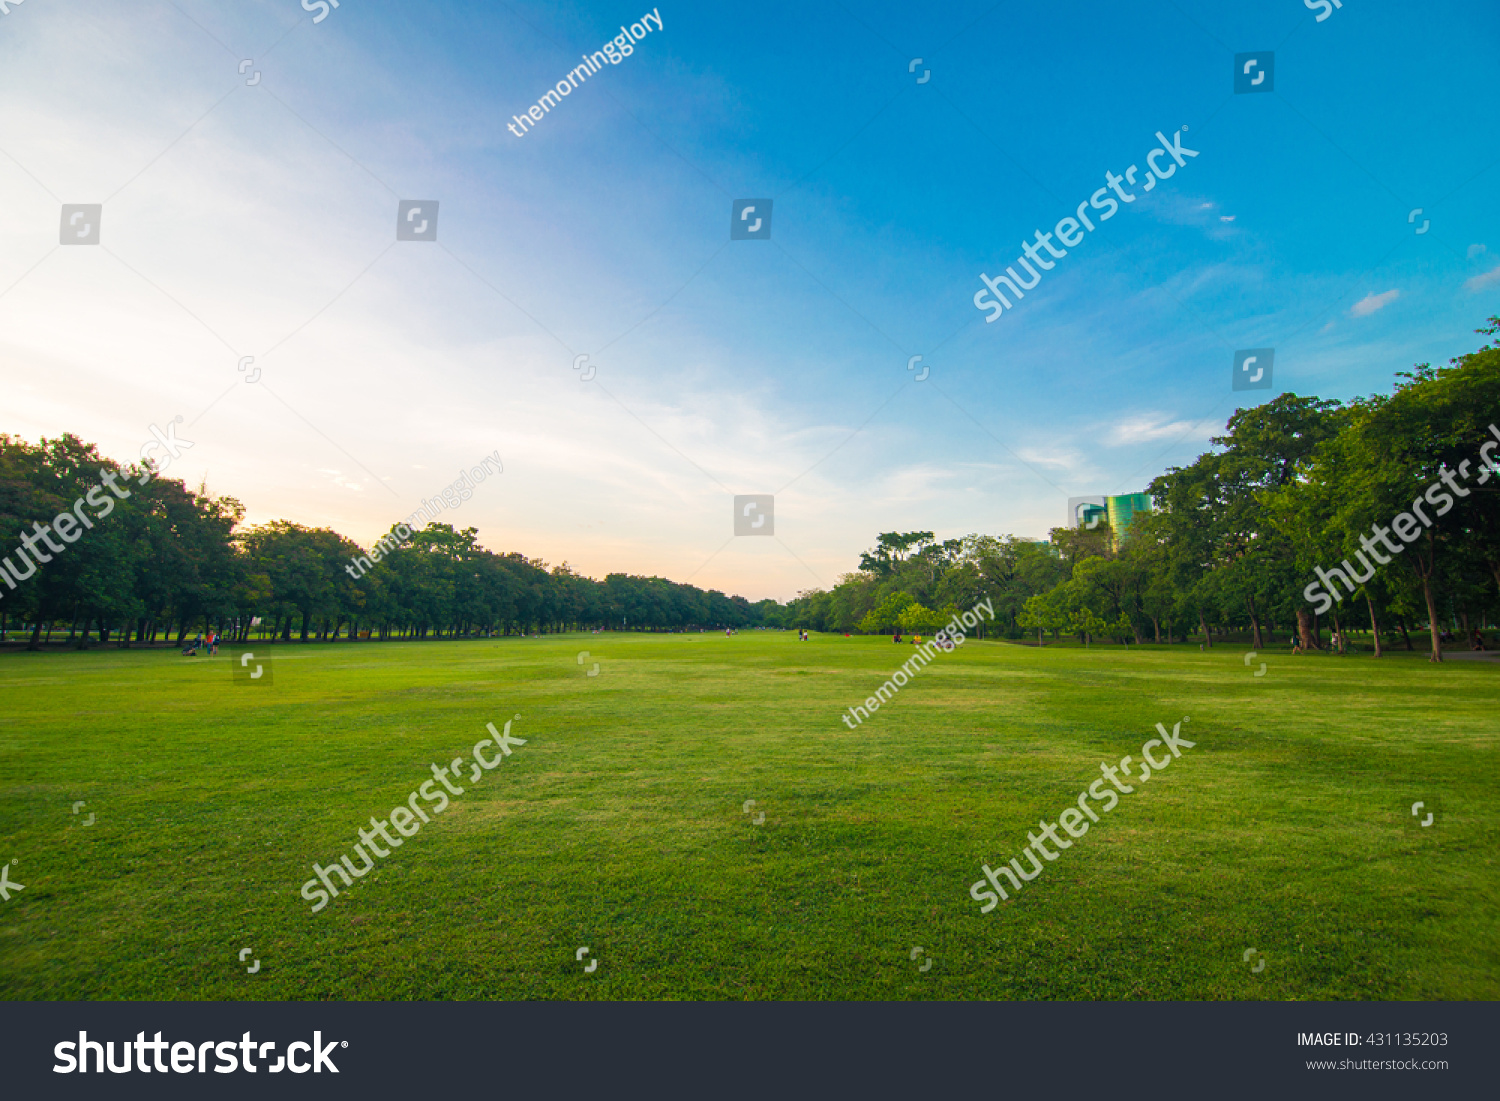 Green beautiful park and blue sky in evening #431135203